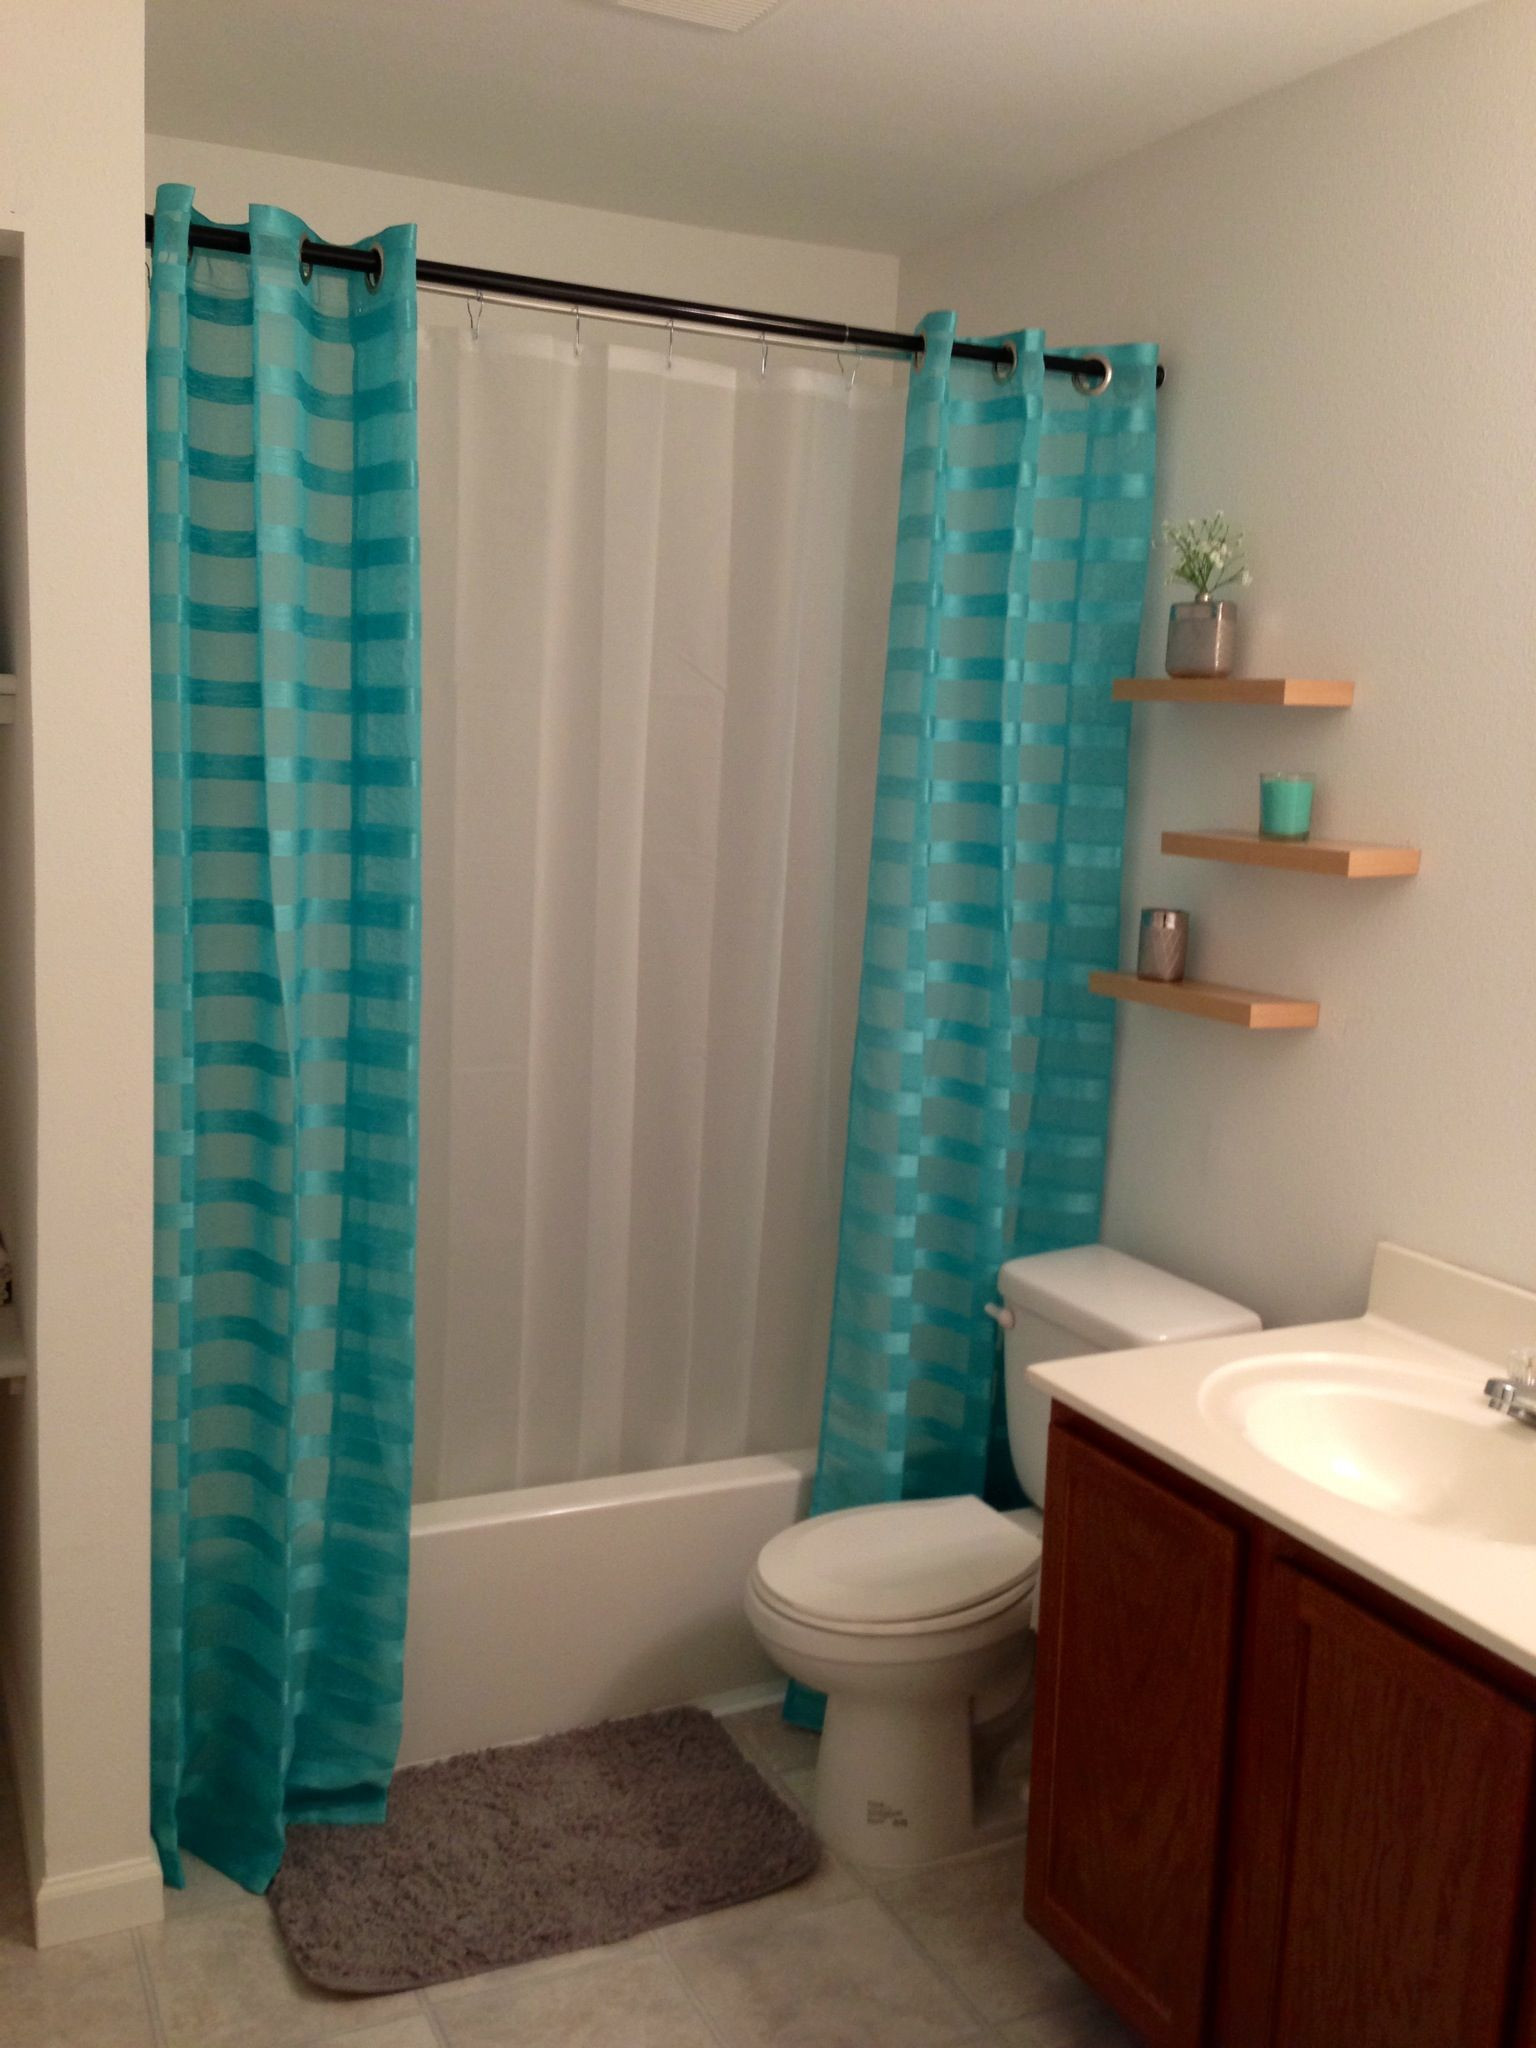 Bathroom Shower Curtain Decorating Ideas
 Pretty Box Valance In Bathroom Eclectic With Valance Ideas